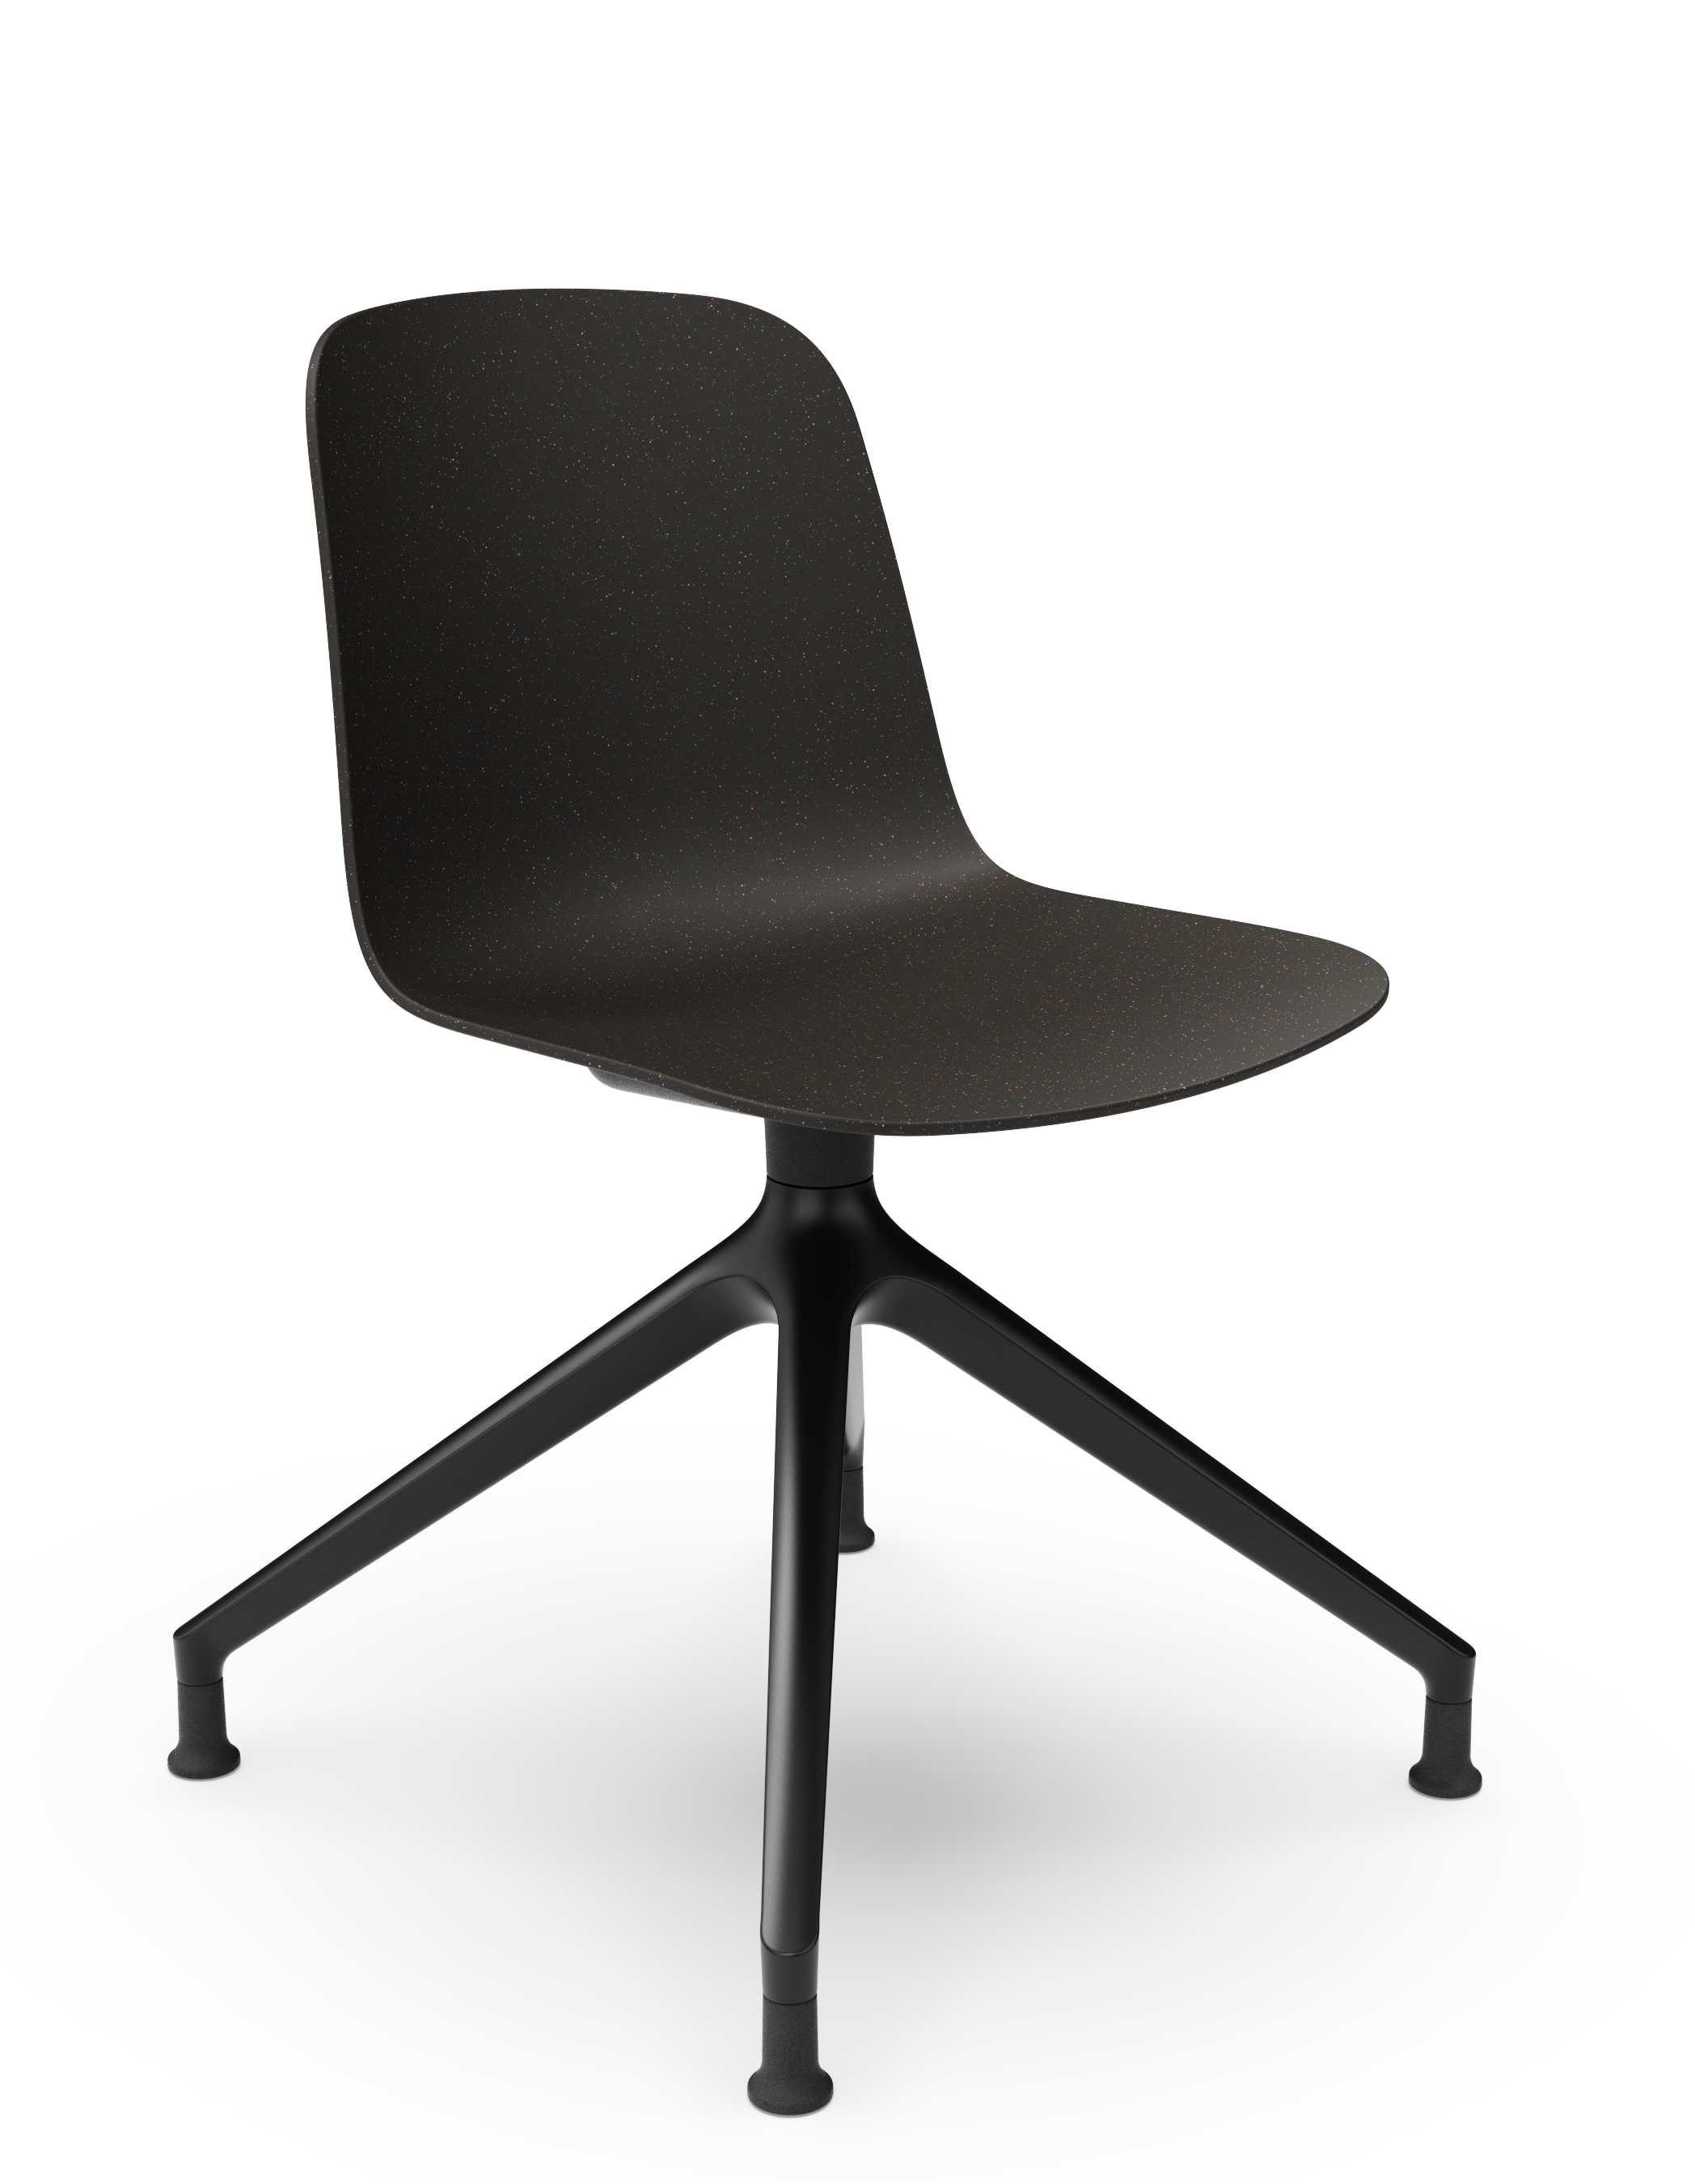 WS - Moto Side Chair - 4 Star Base - Black - Front Angle